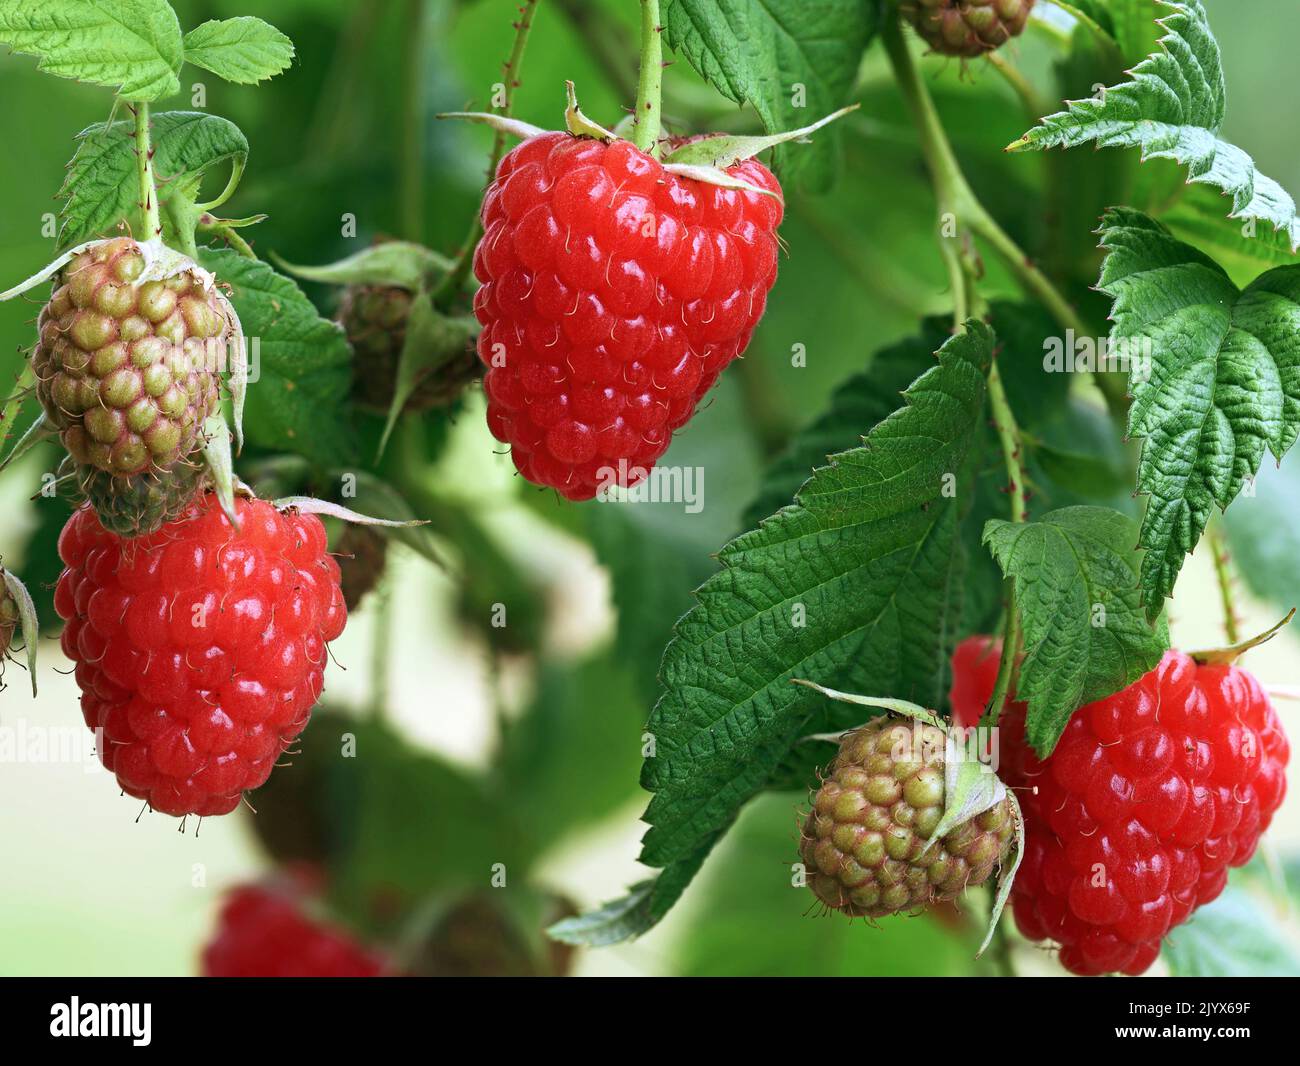 close up of red ripe and unripe raspberries on a raspberry bush in garden Stock Photo